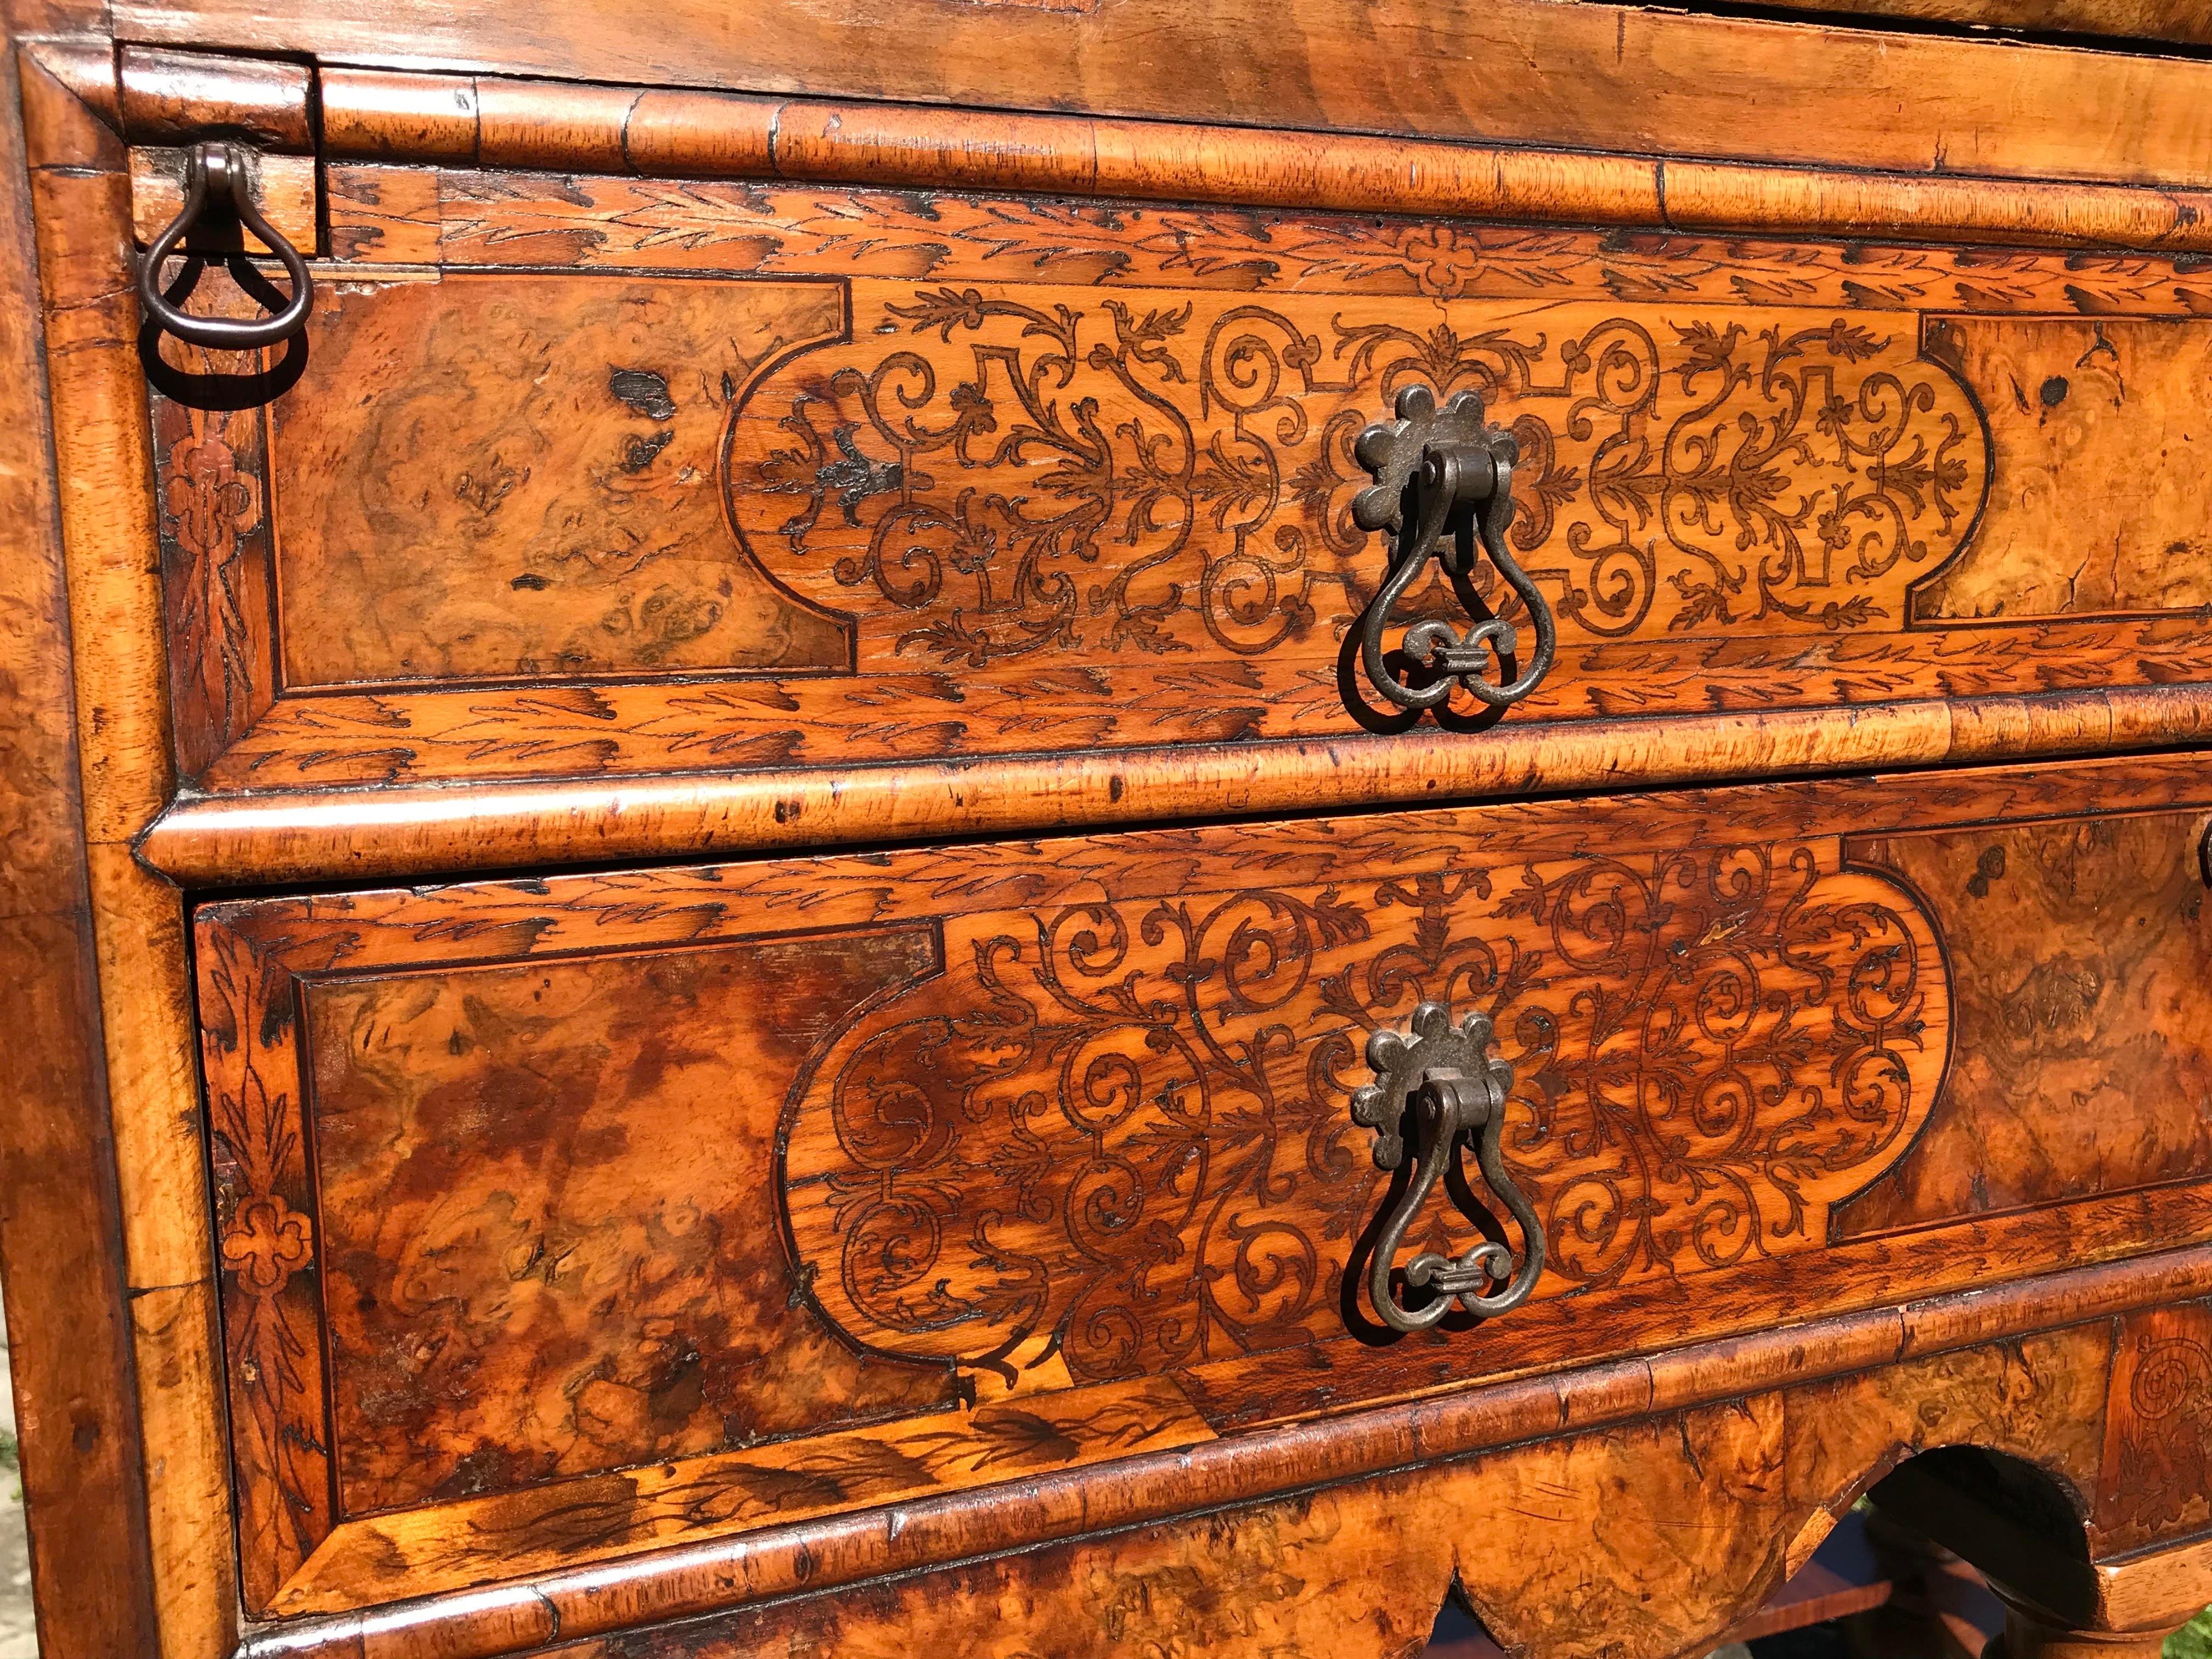 A burr walnut and marqueterie (or marquetry) bureau on stand, of lovely rich color.
Late 17th century, William & Mary period, circa 1690.

This small antique walnut and marquetry bureau is of a rare early form, a precursor to the transition taking